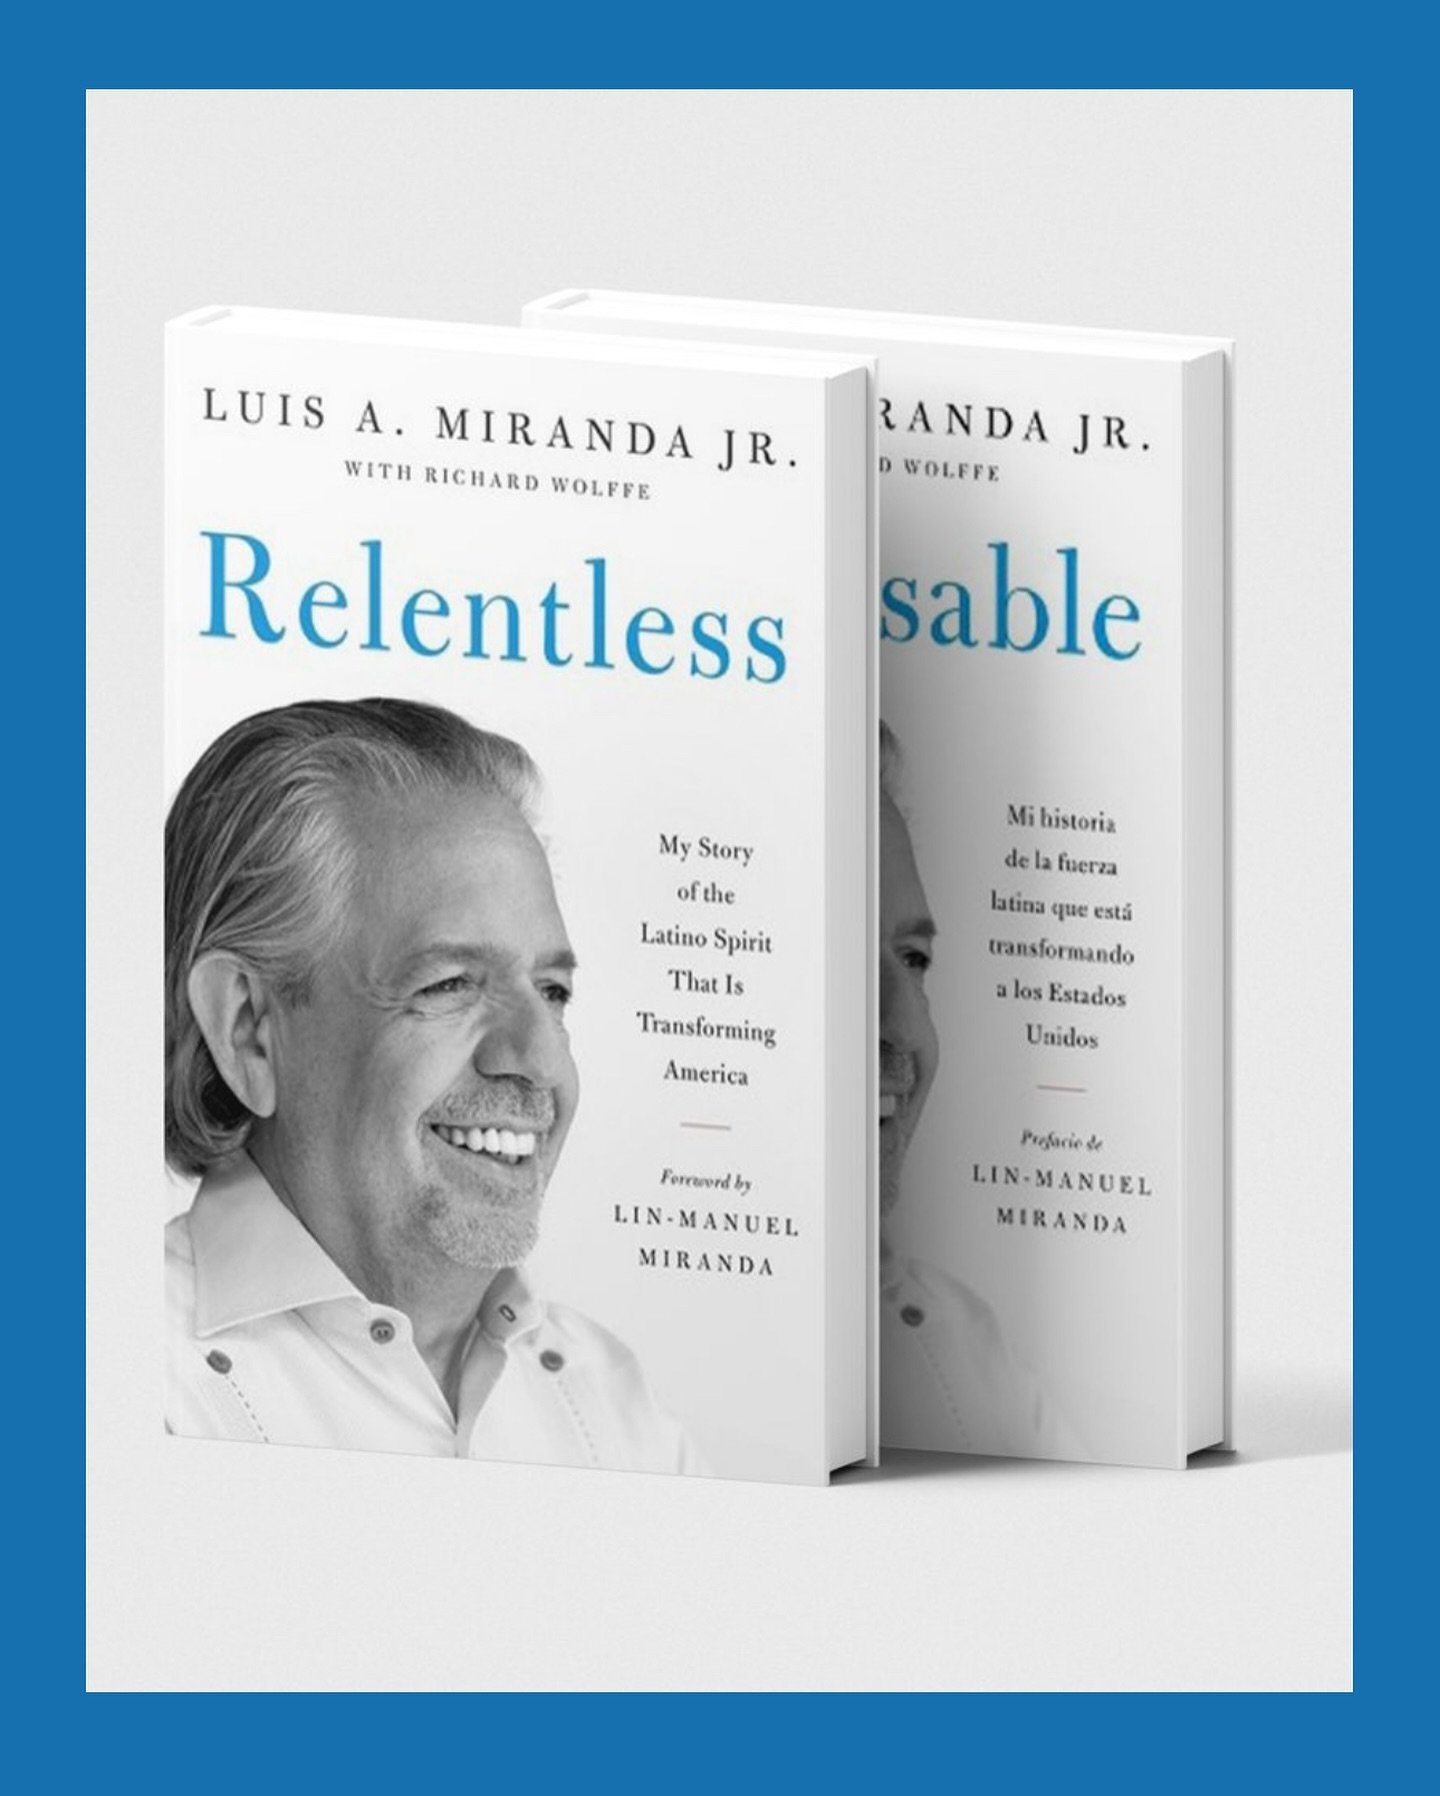 In a world that often feels divided, #Relentless by Luis A. Miranda Jr. is a reminder of the power of unity and the impact of relentless determination. Join us in celebrating his journey from activist to influencer and discover how you too can make a